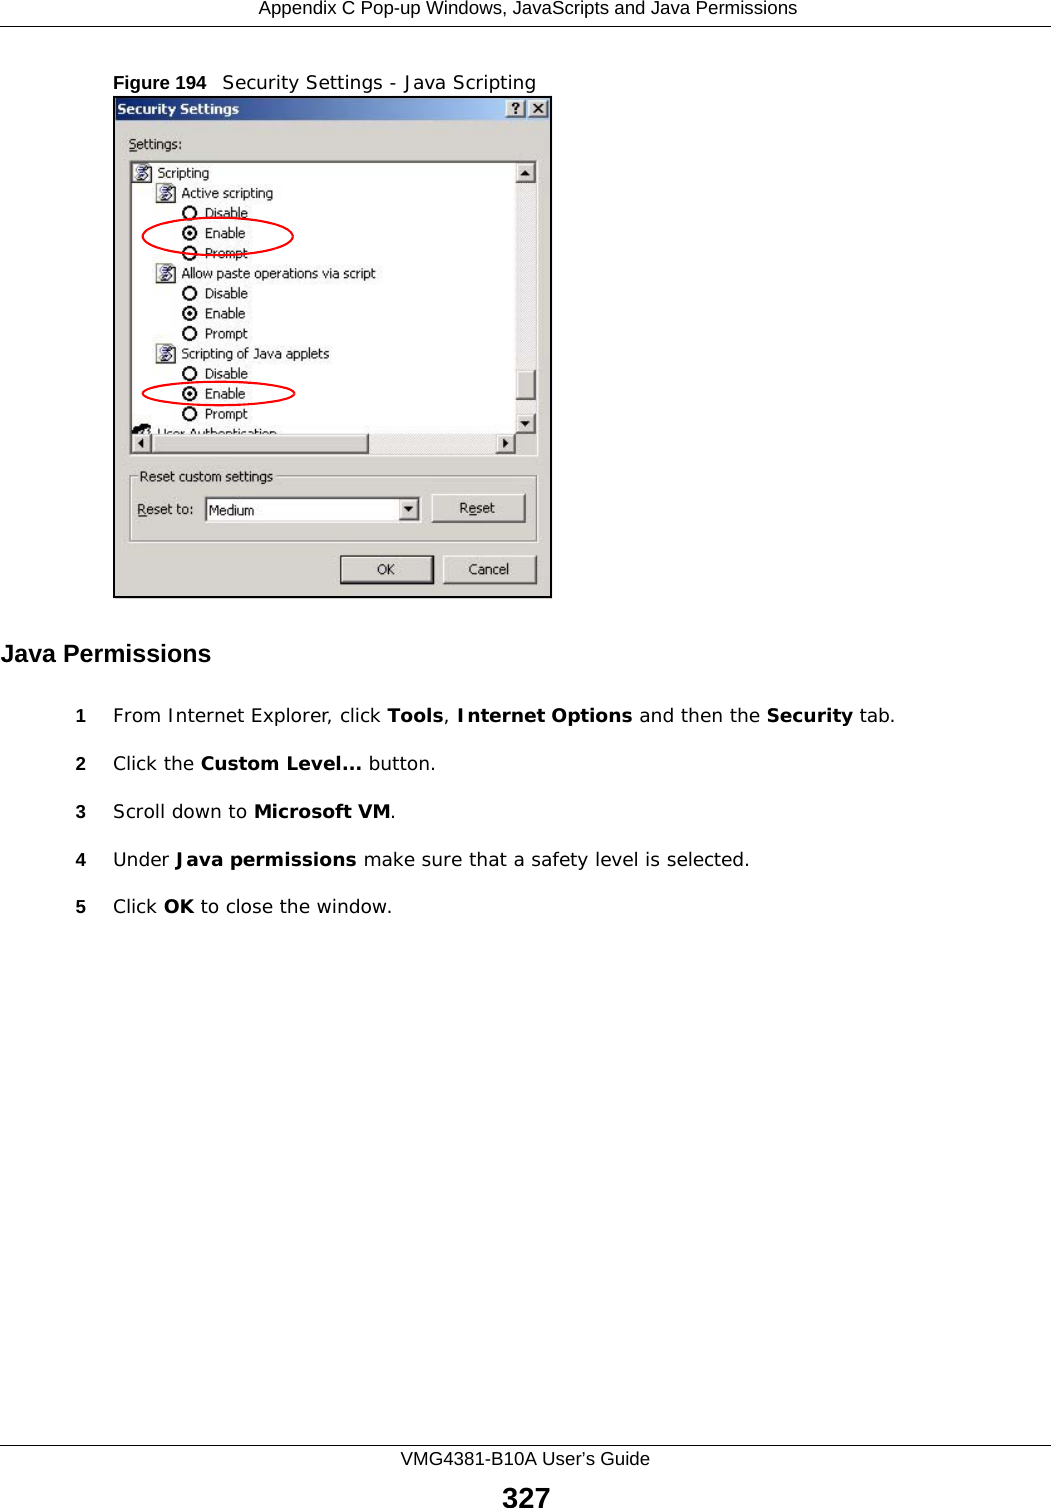  Appendix C Pop-up Windows, JavaScripts and Java PermissionsVMG4381-B10A User’s Guide327Figure 194   Security Settings - Java ScriptingJava Permissions1From Internet Explorer, click Tools, Internet Options and then the Security tab. 2Click the Custom Level... button. 3Scroll down to Microsoft VM. 4Under Java permissions make sure that a safety level is selected.5Click OK to close the window.